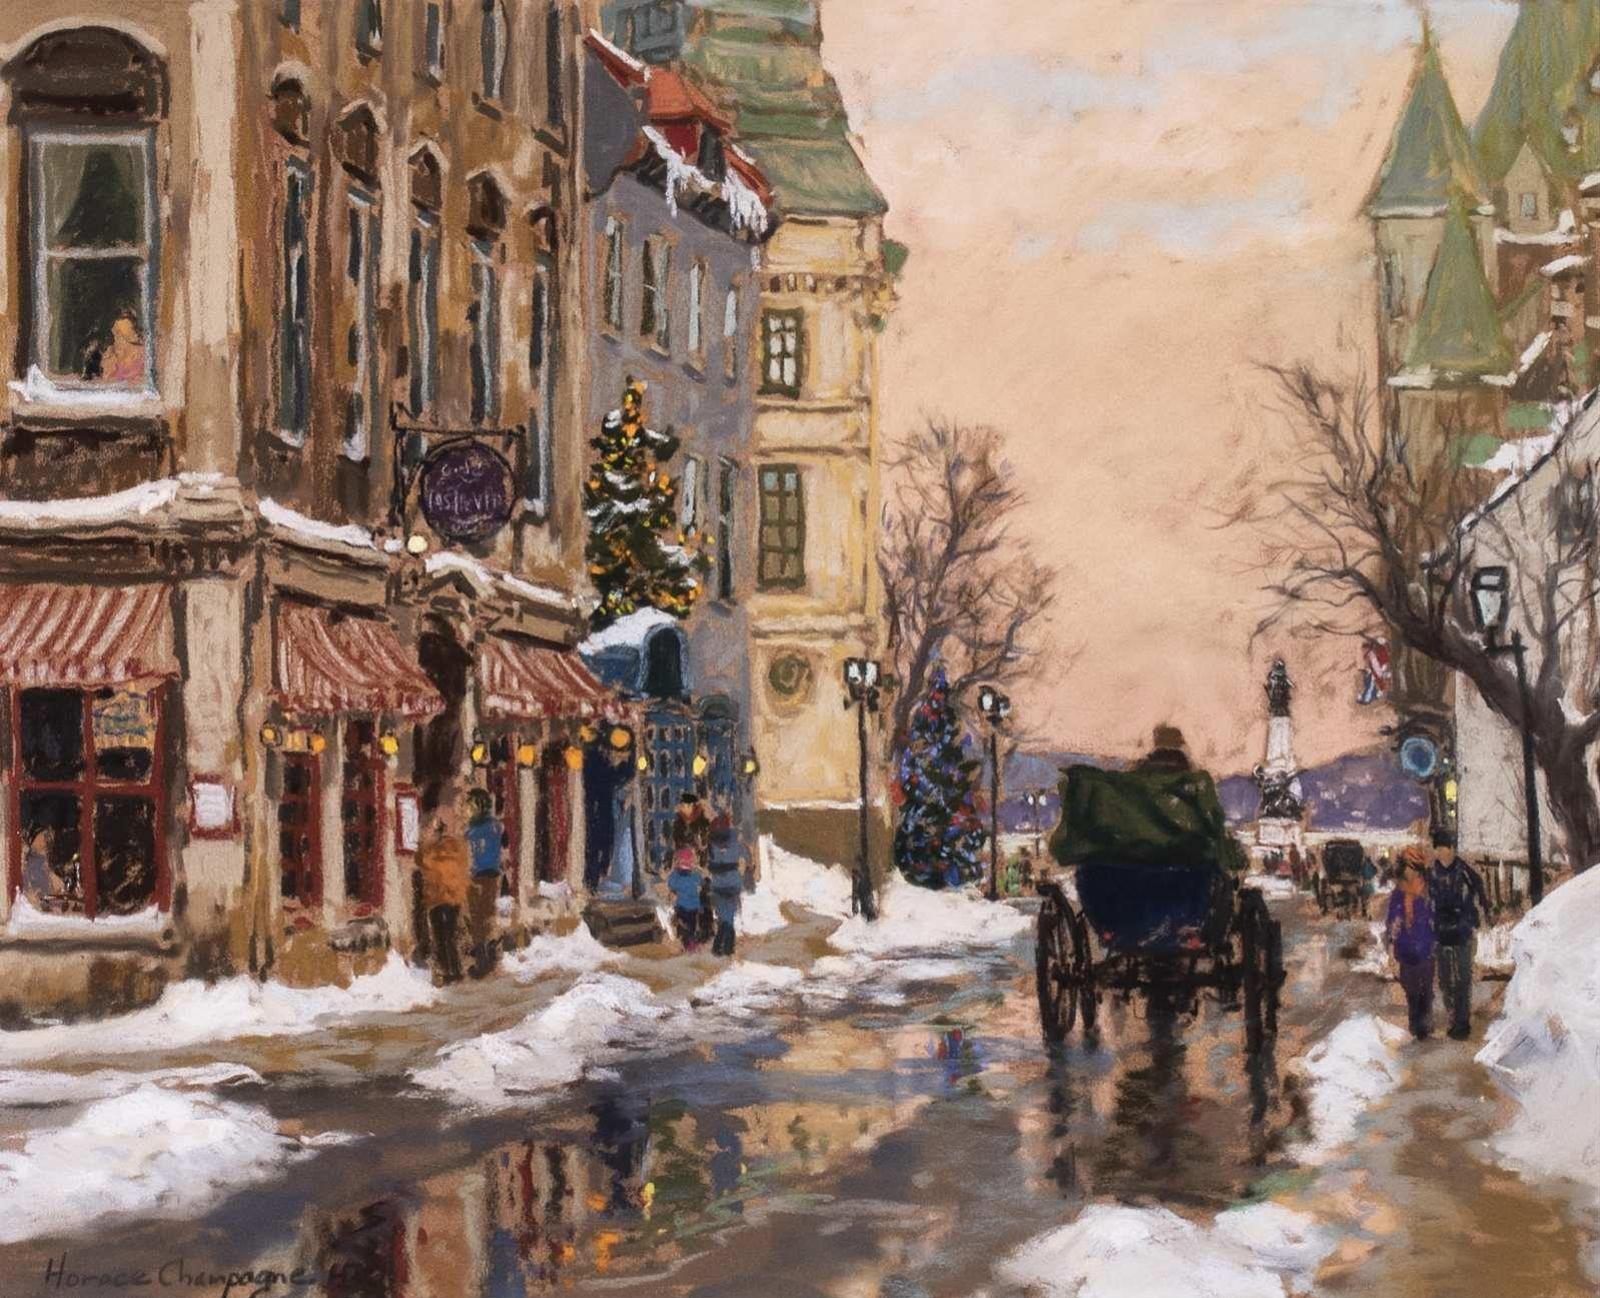 Horace Champagne (1937) - Winter Reflections (Rue St-Louis, Old Quebec City); 1999